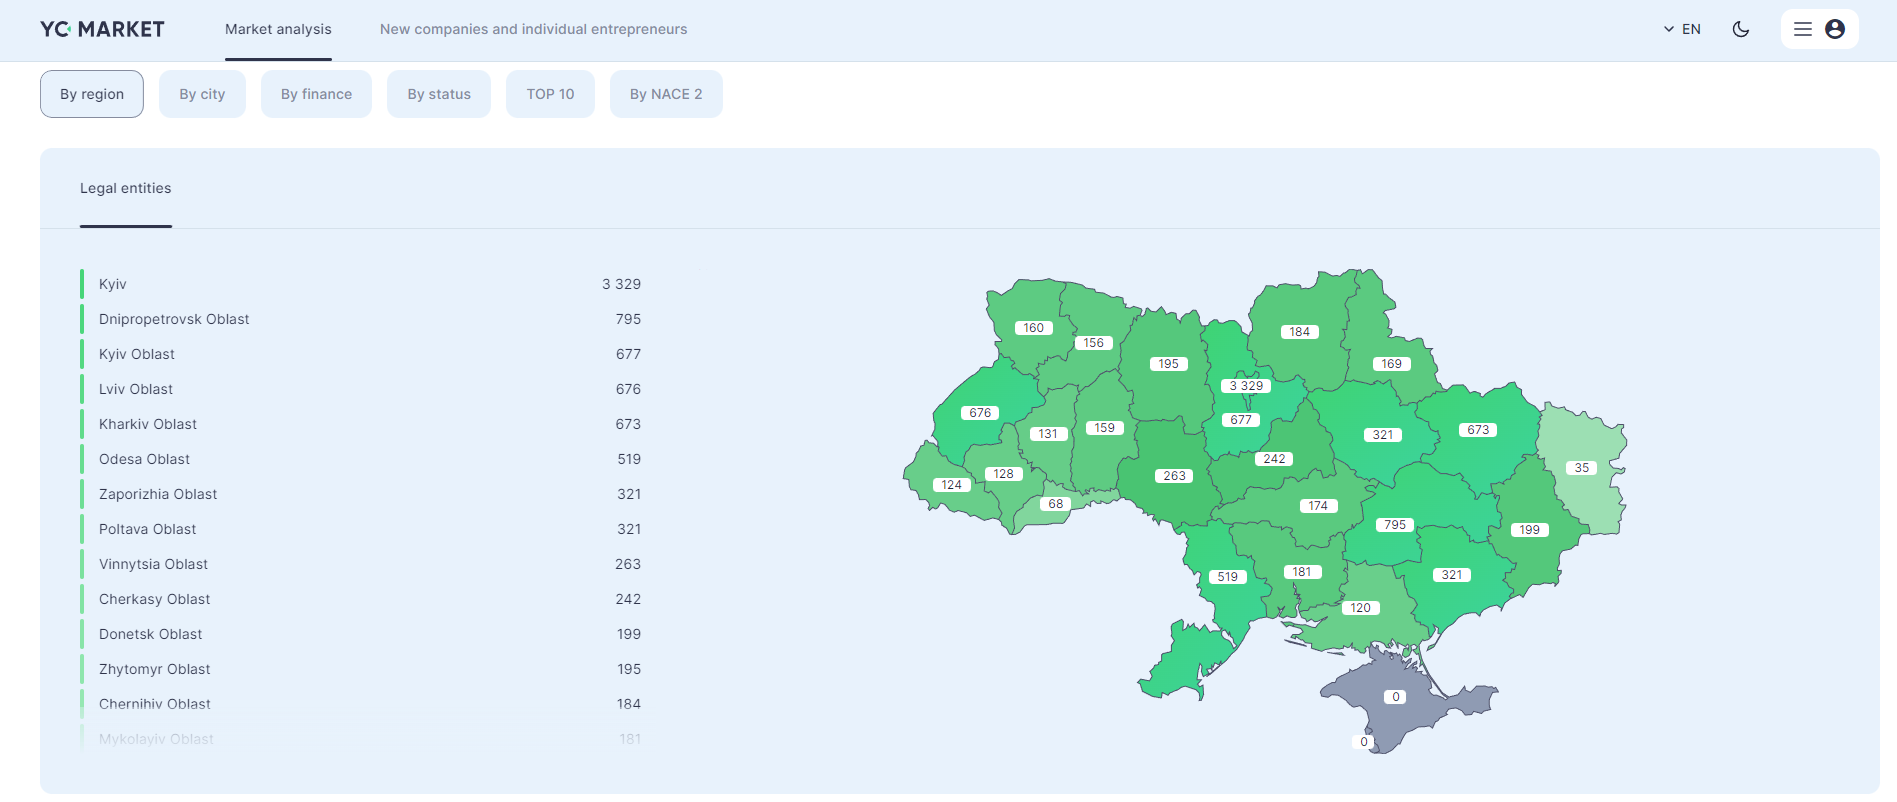 Distribution of companies by regions with "Construction" activity in Ukraine